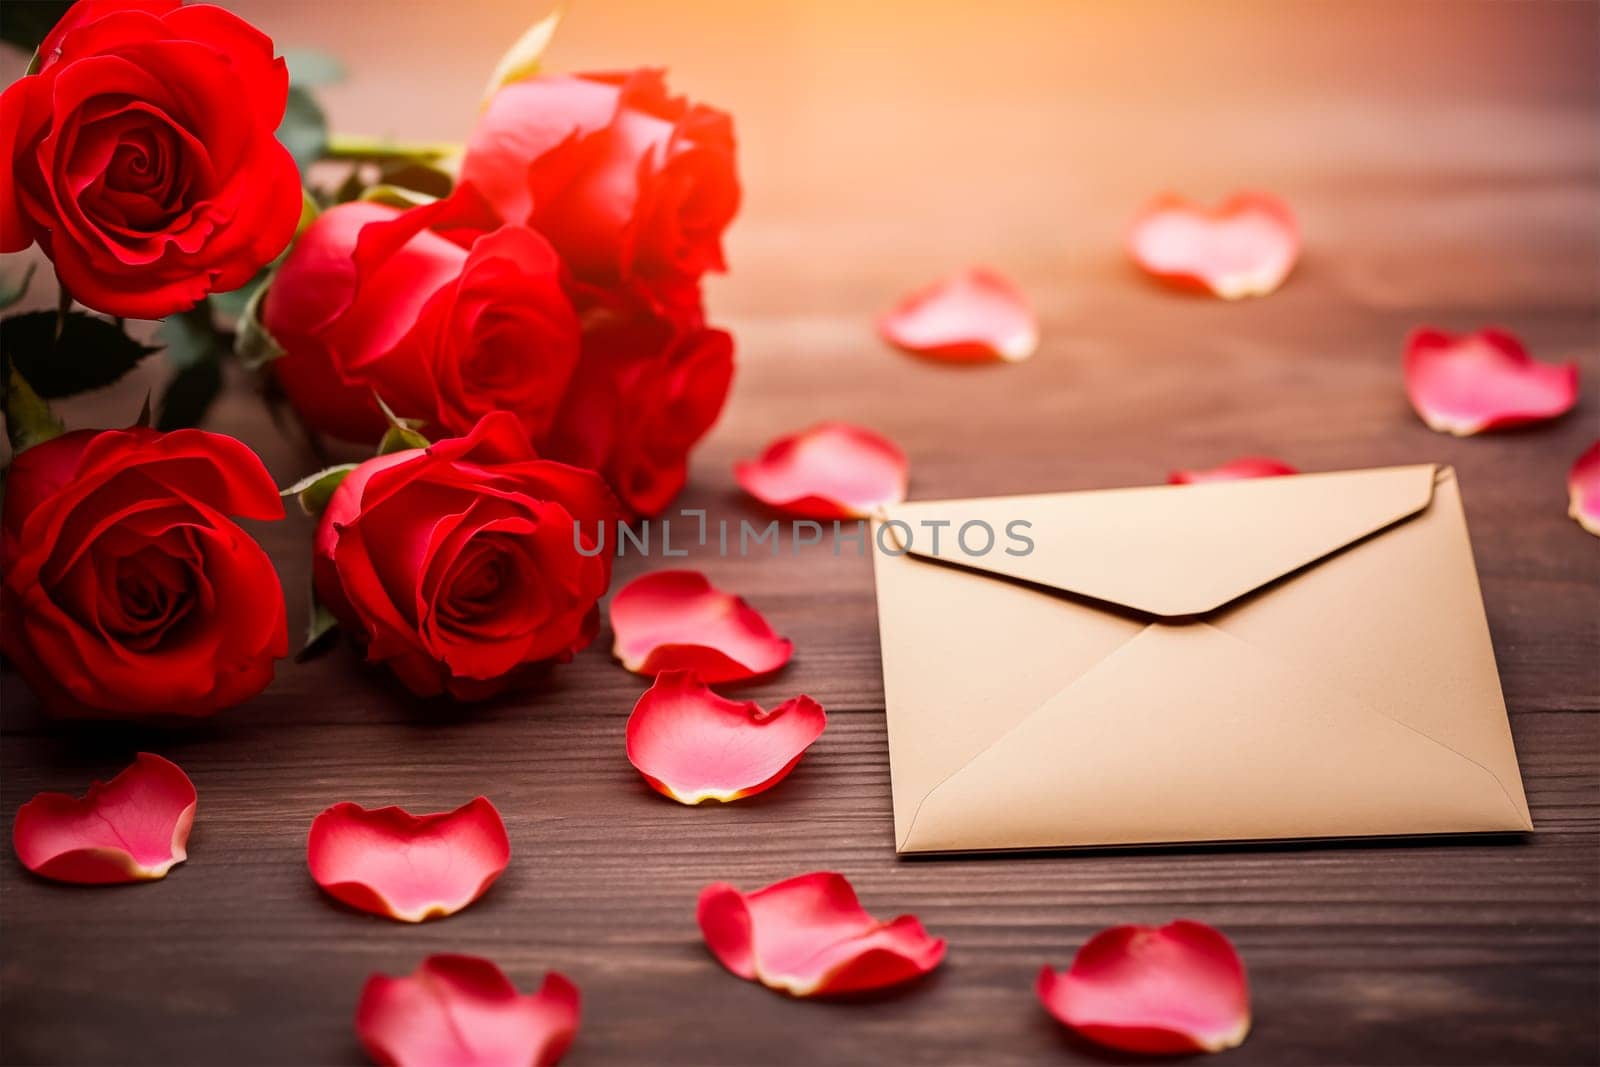 Romantic Valentine’s Day Roses and Love Letter by dimol